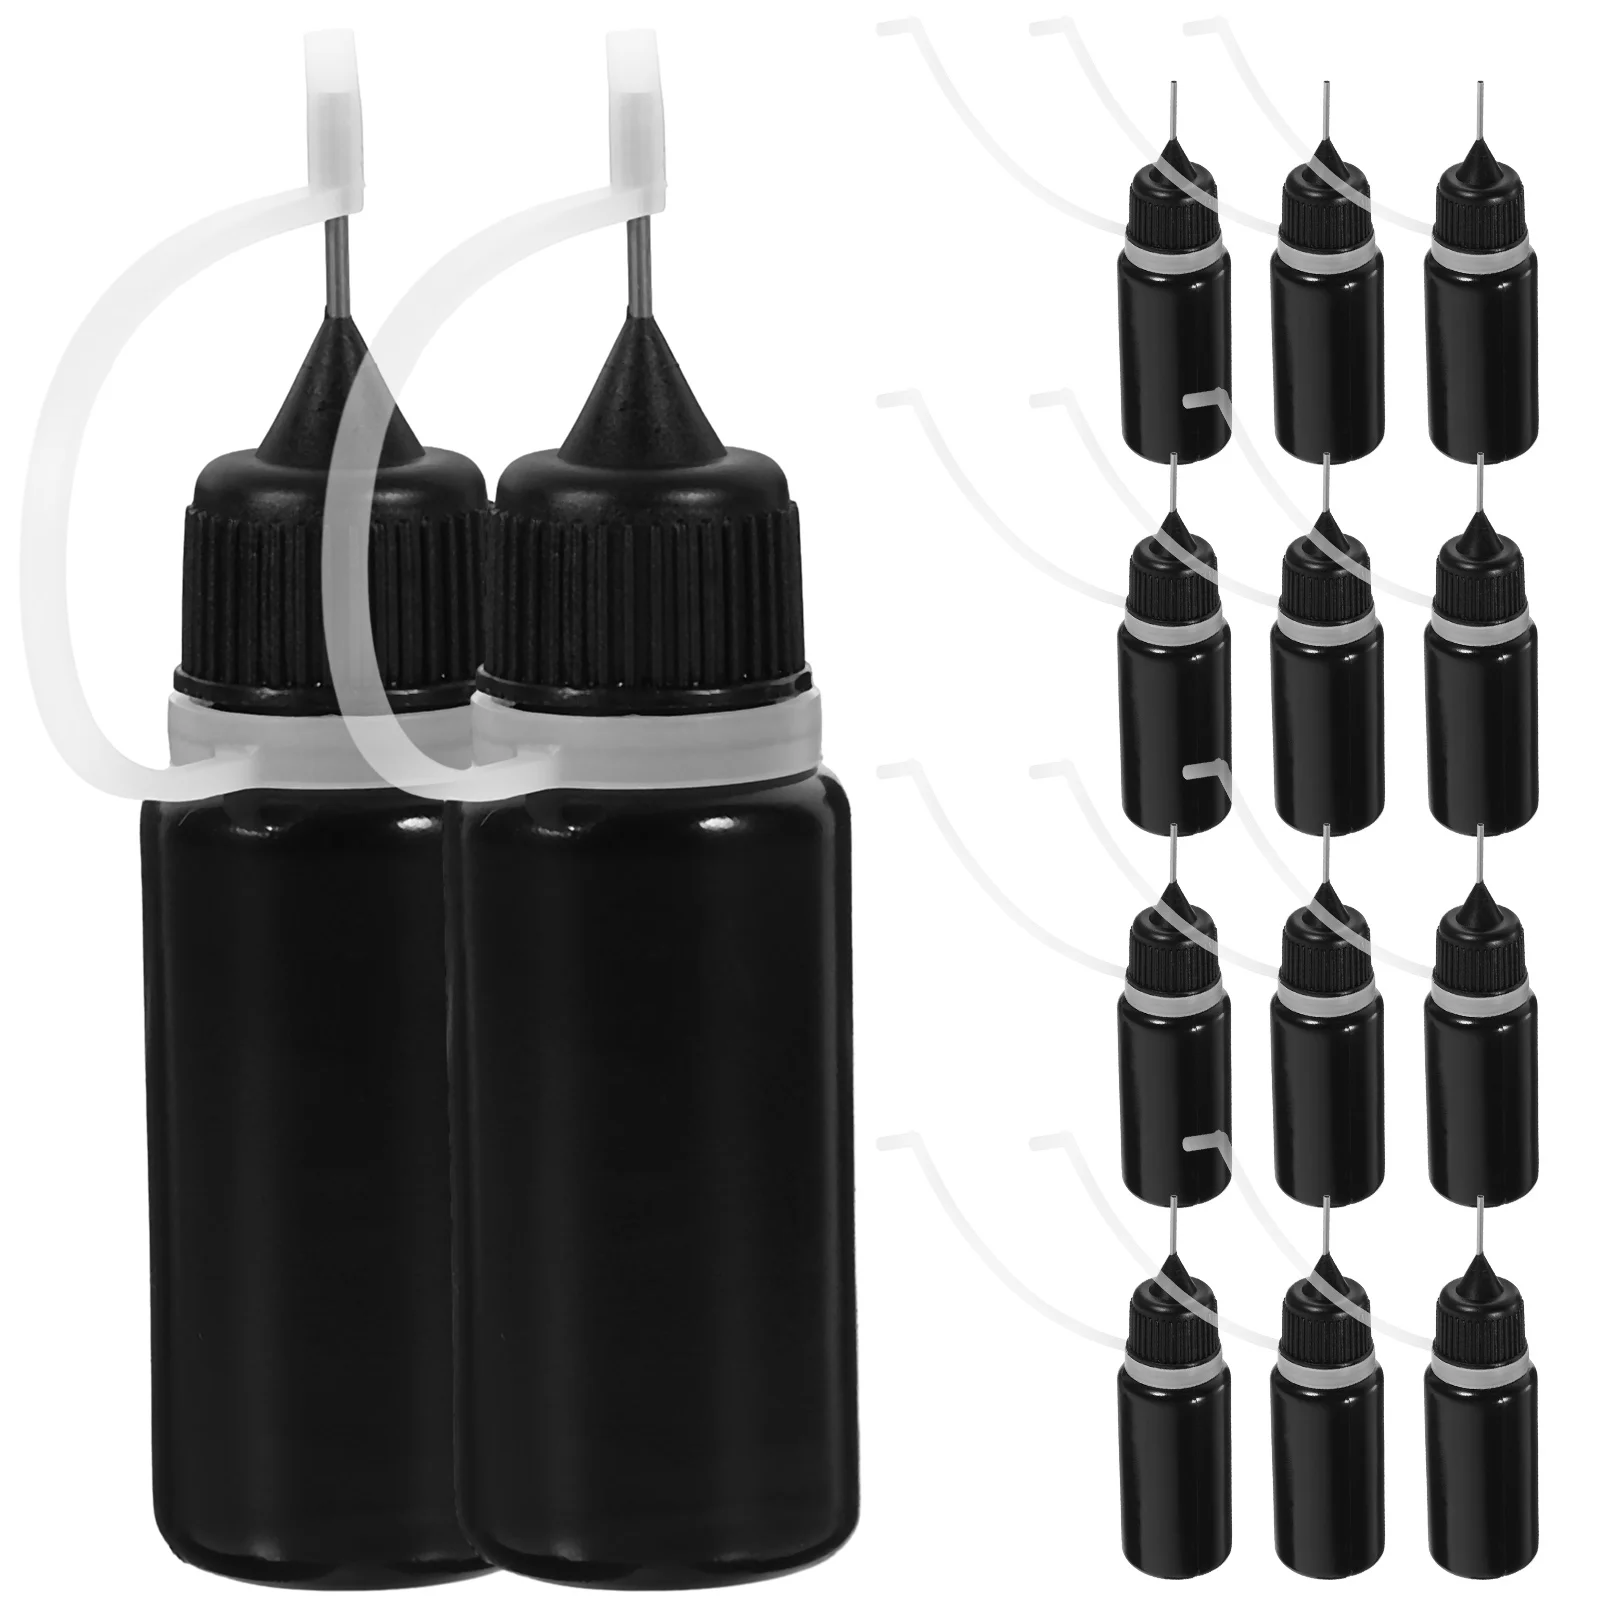 20 Pcs Bottled Squeeze Bottles Glue with Fine Tip for Liquids Needle Small Stainless Steel Precision Applicator Dispenser m1 6m2 m5 stainless steel 304 plum blossom flat head countersunk screw anti loose paint treatment spot blue glue screw1173